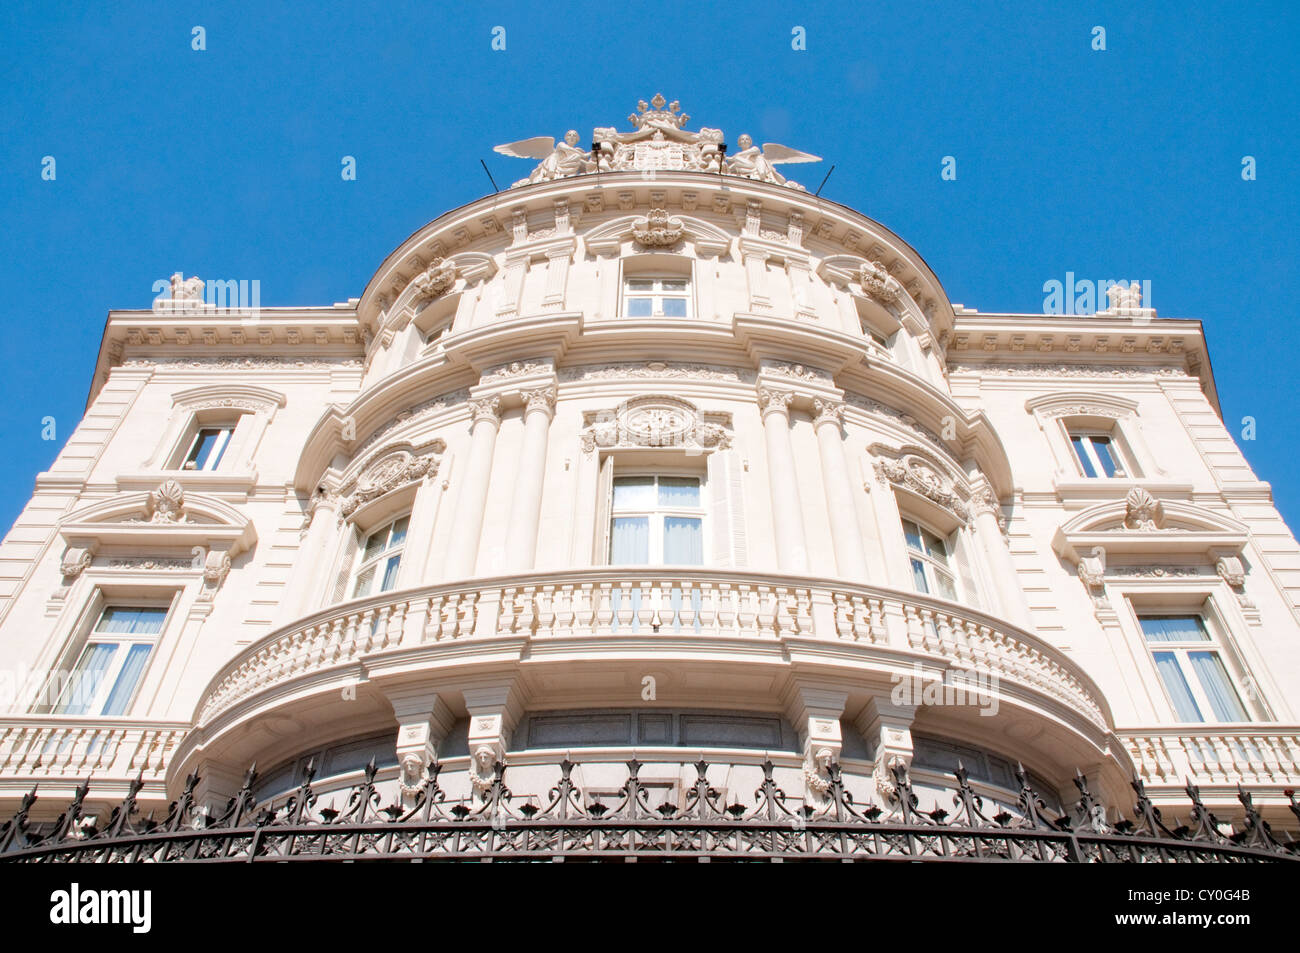 Facade of Linares Palace, view from below. Madrid, Spain. Stock Photo